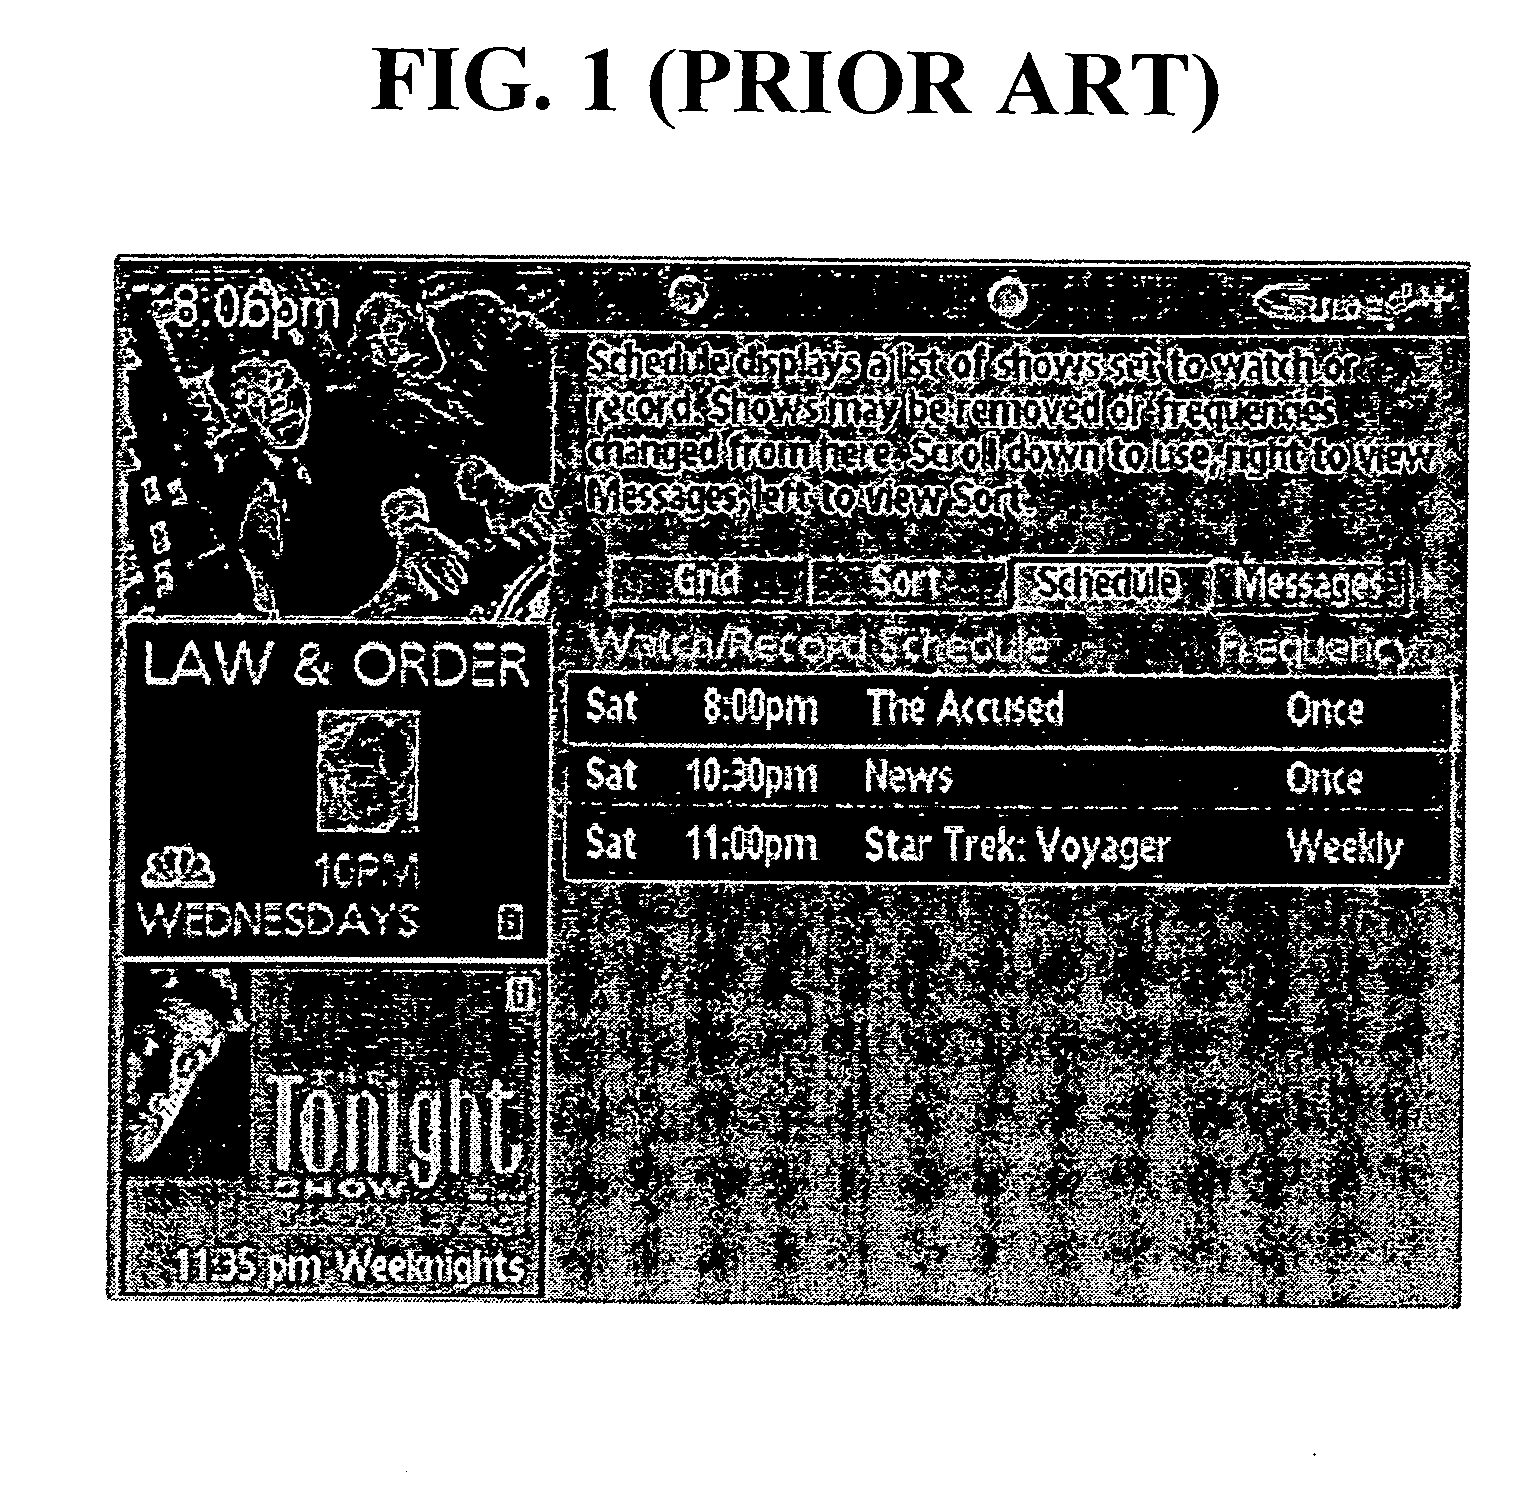 Method and apparatus for scheduling digital TV programs